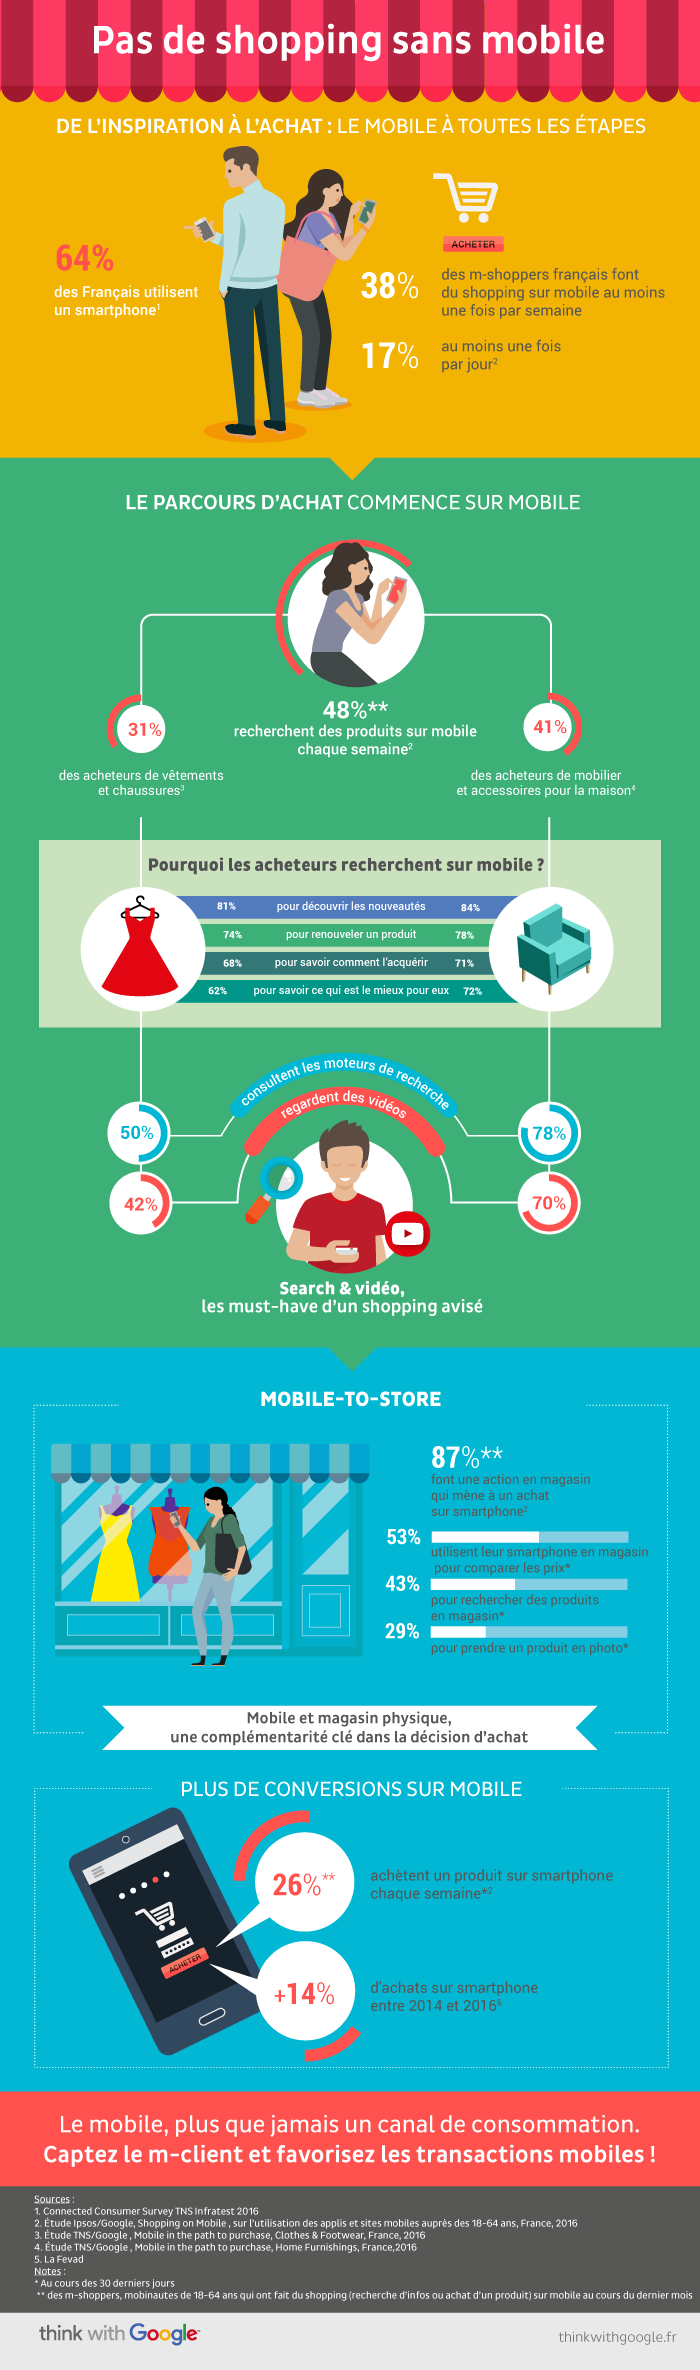 11105_Infographie-Shopping_Retail_Think_with_Google (1)